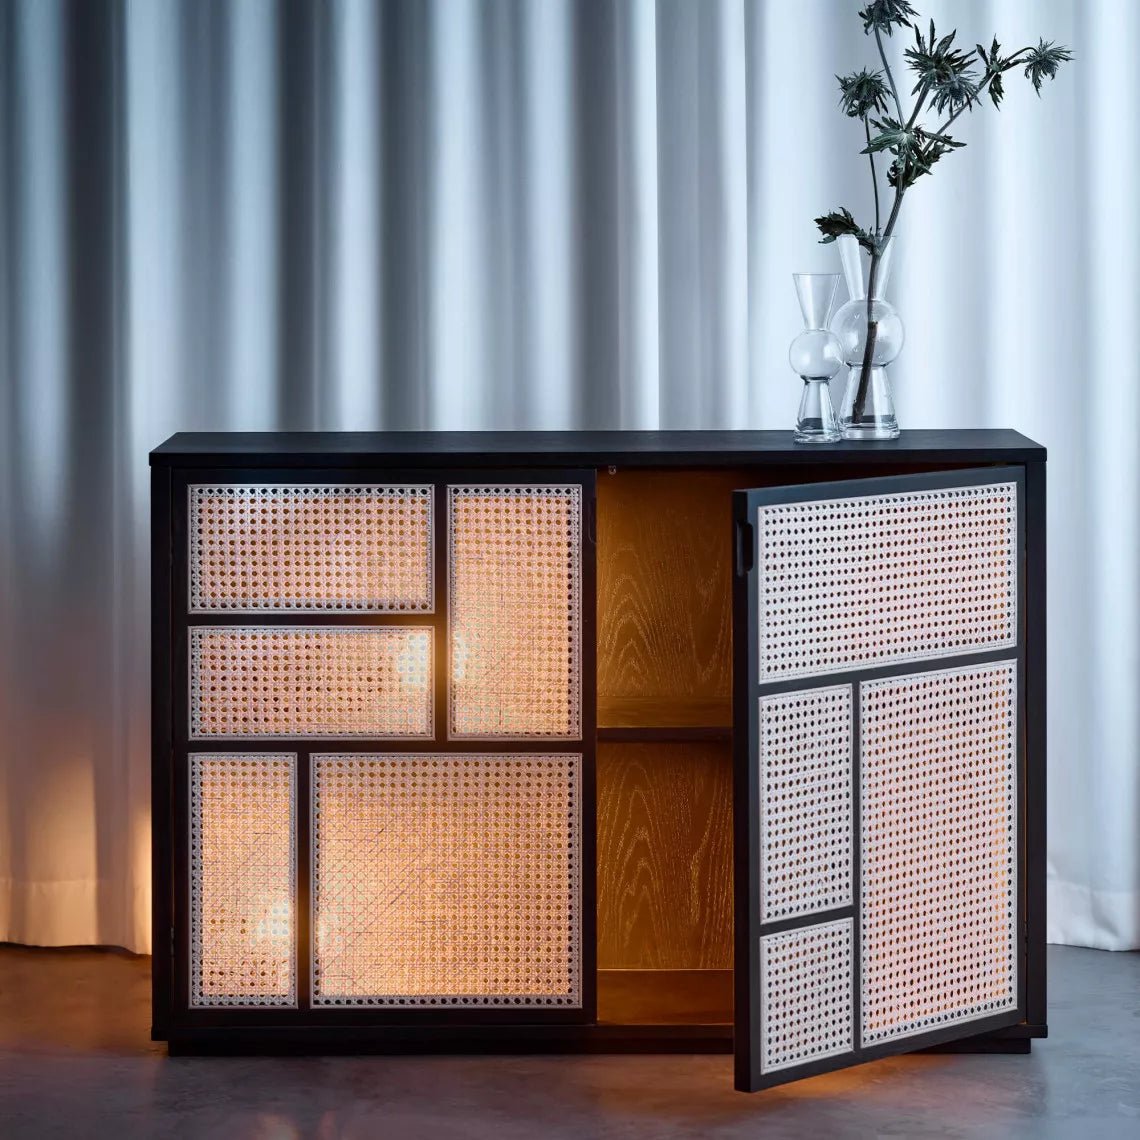 Air - Sideboard Sideboard from Design House Stockholm